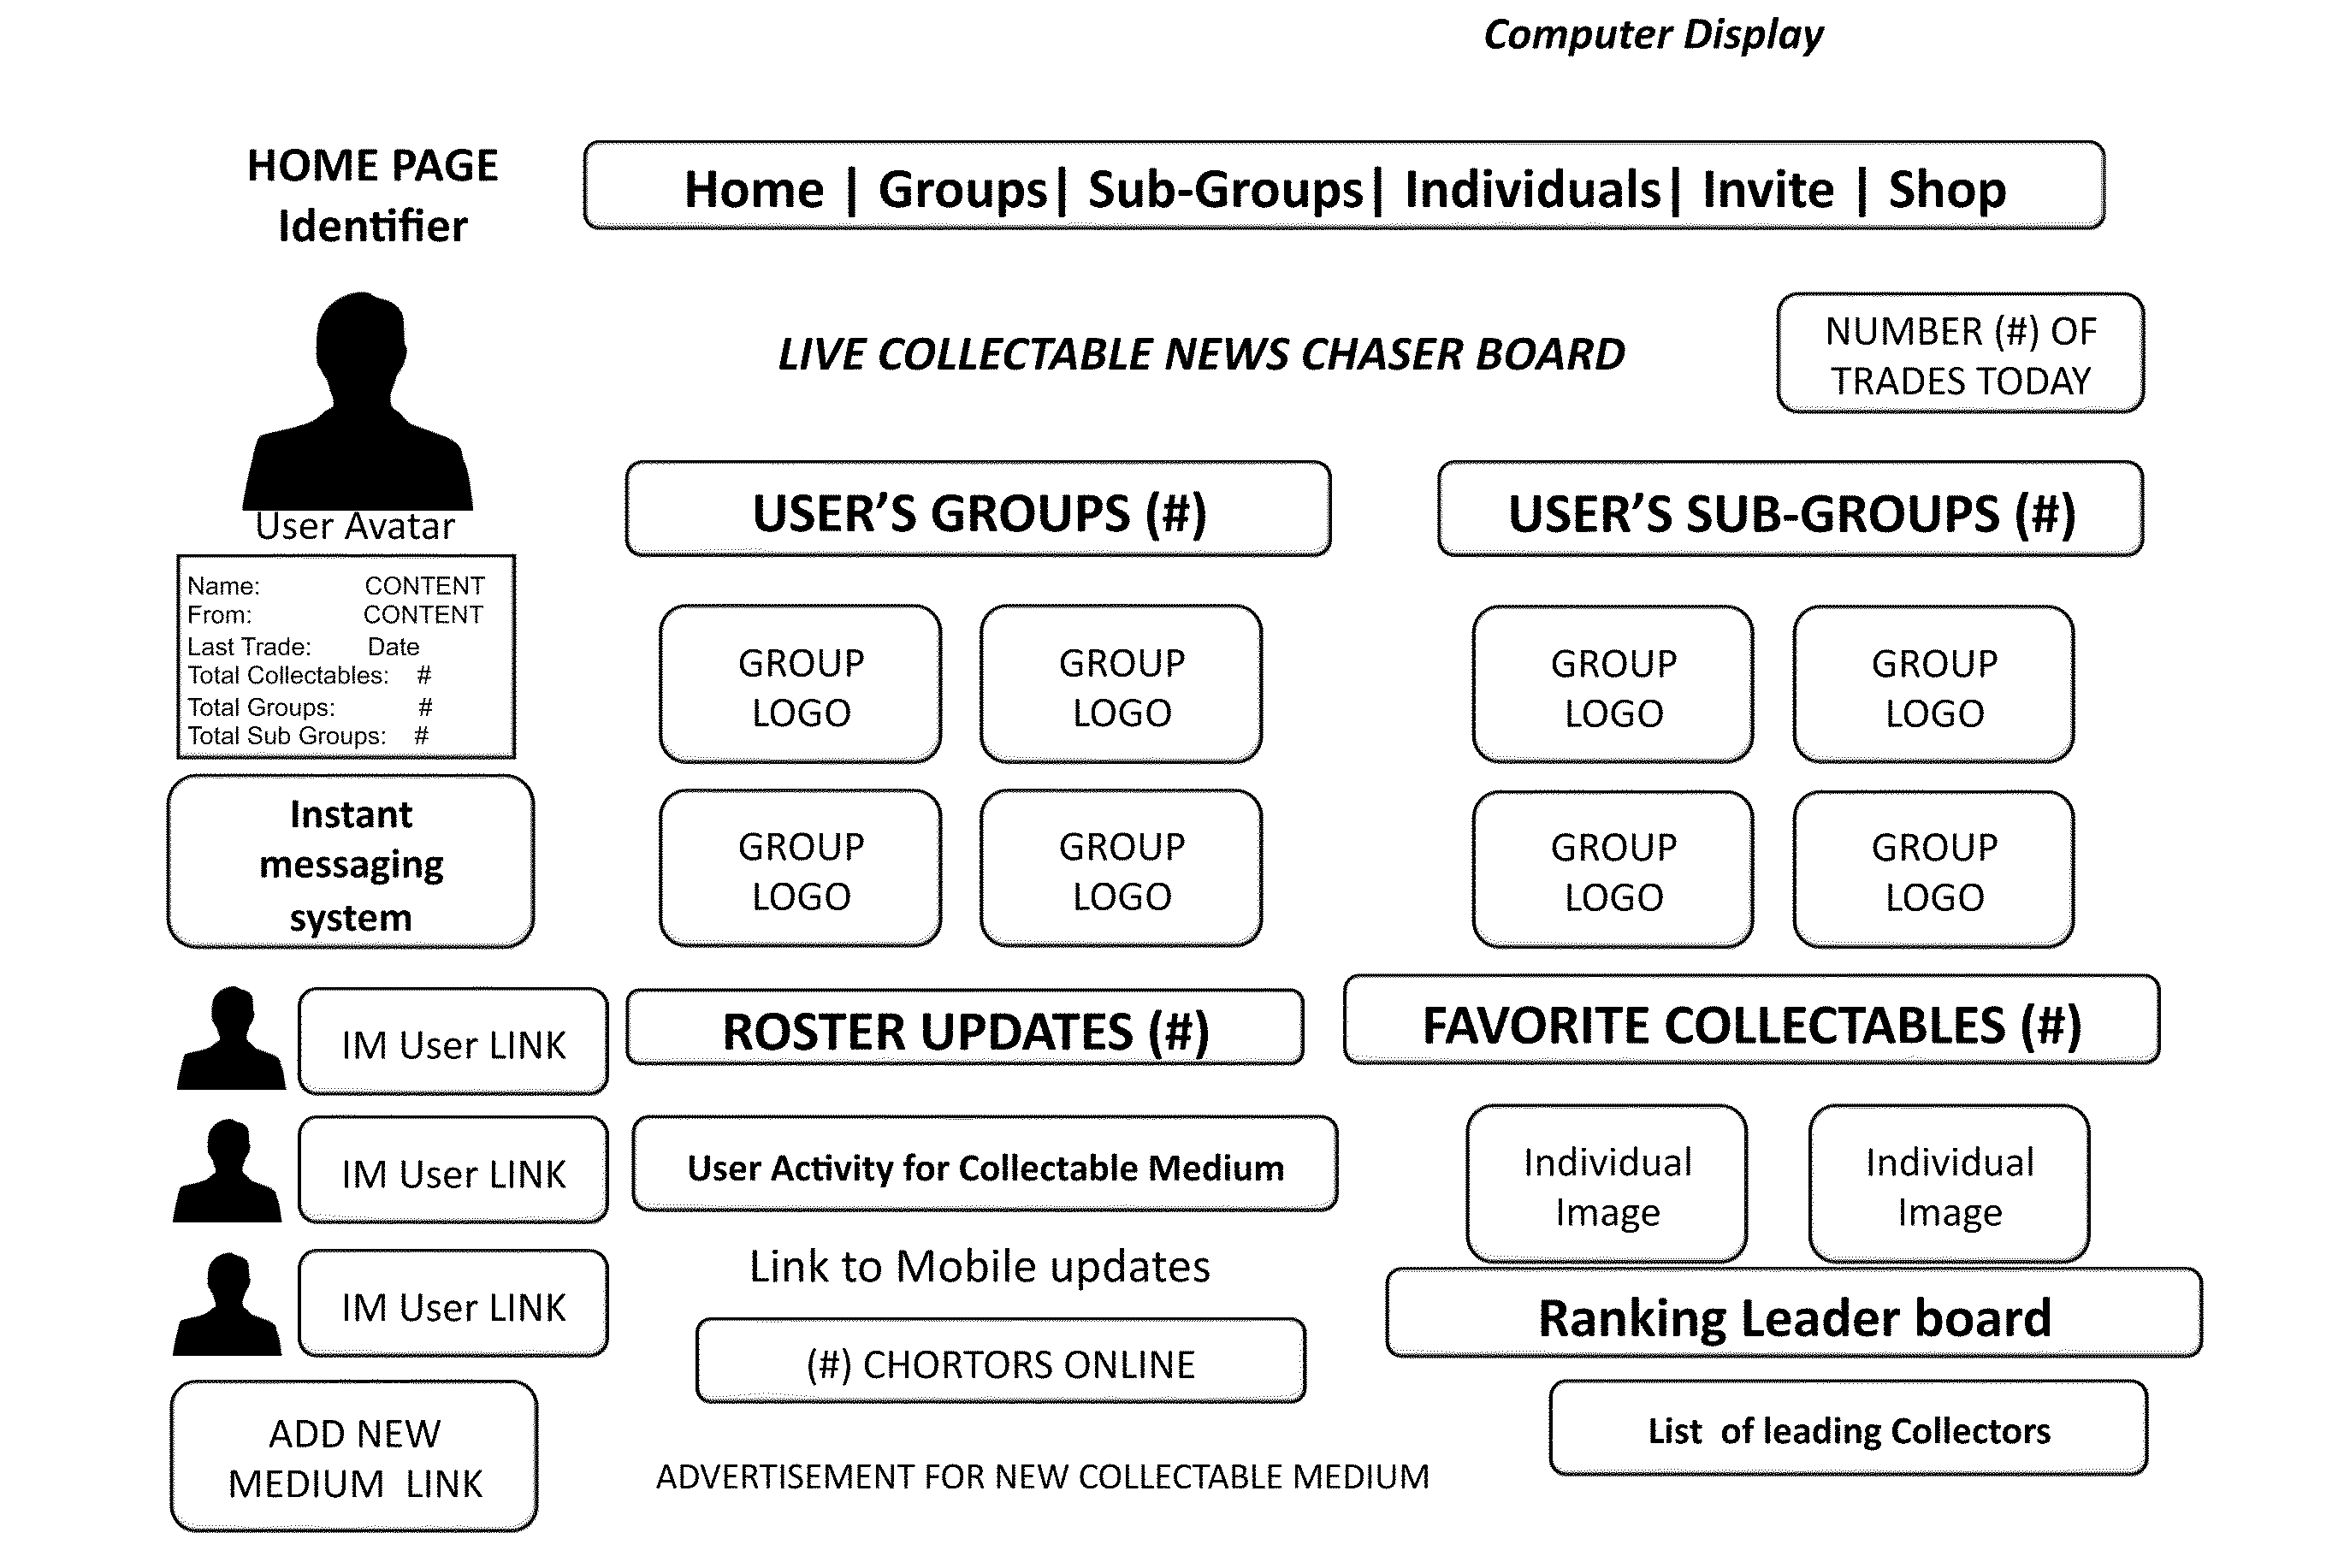 System for collectable medium